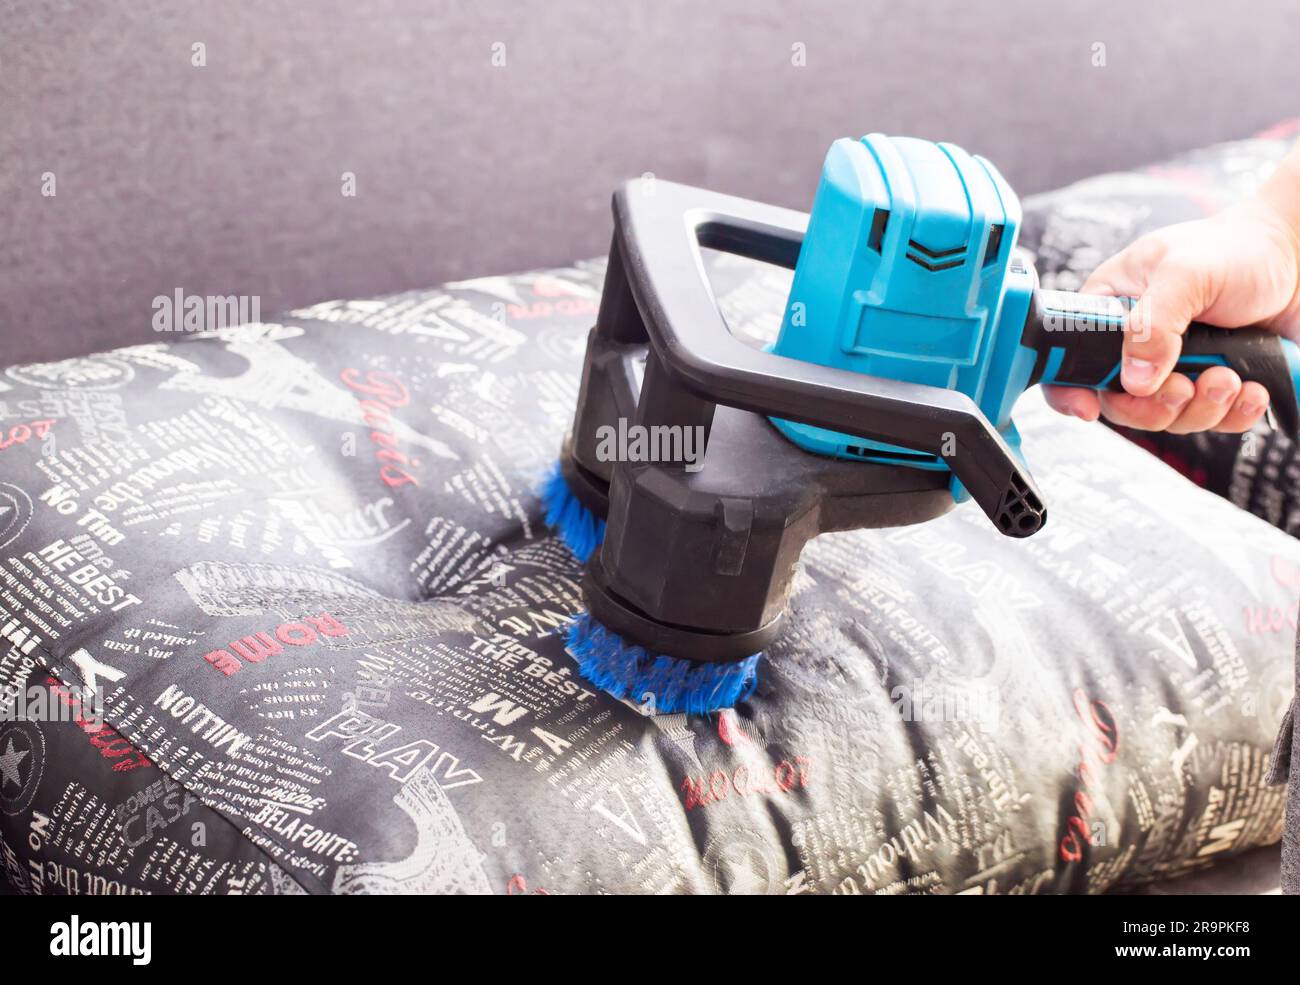 Cleaning sofa cushions with a special electric brush. Dry cleaning of upholstered furniture, close-up. Stock Photo